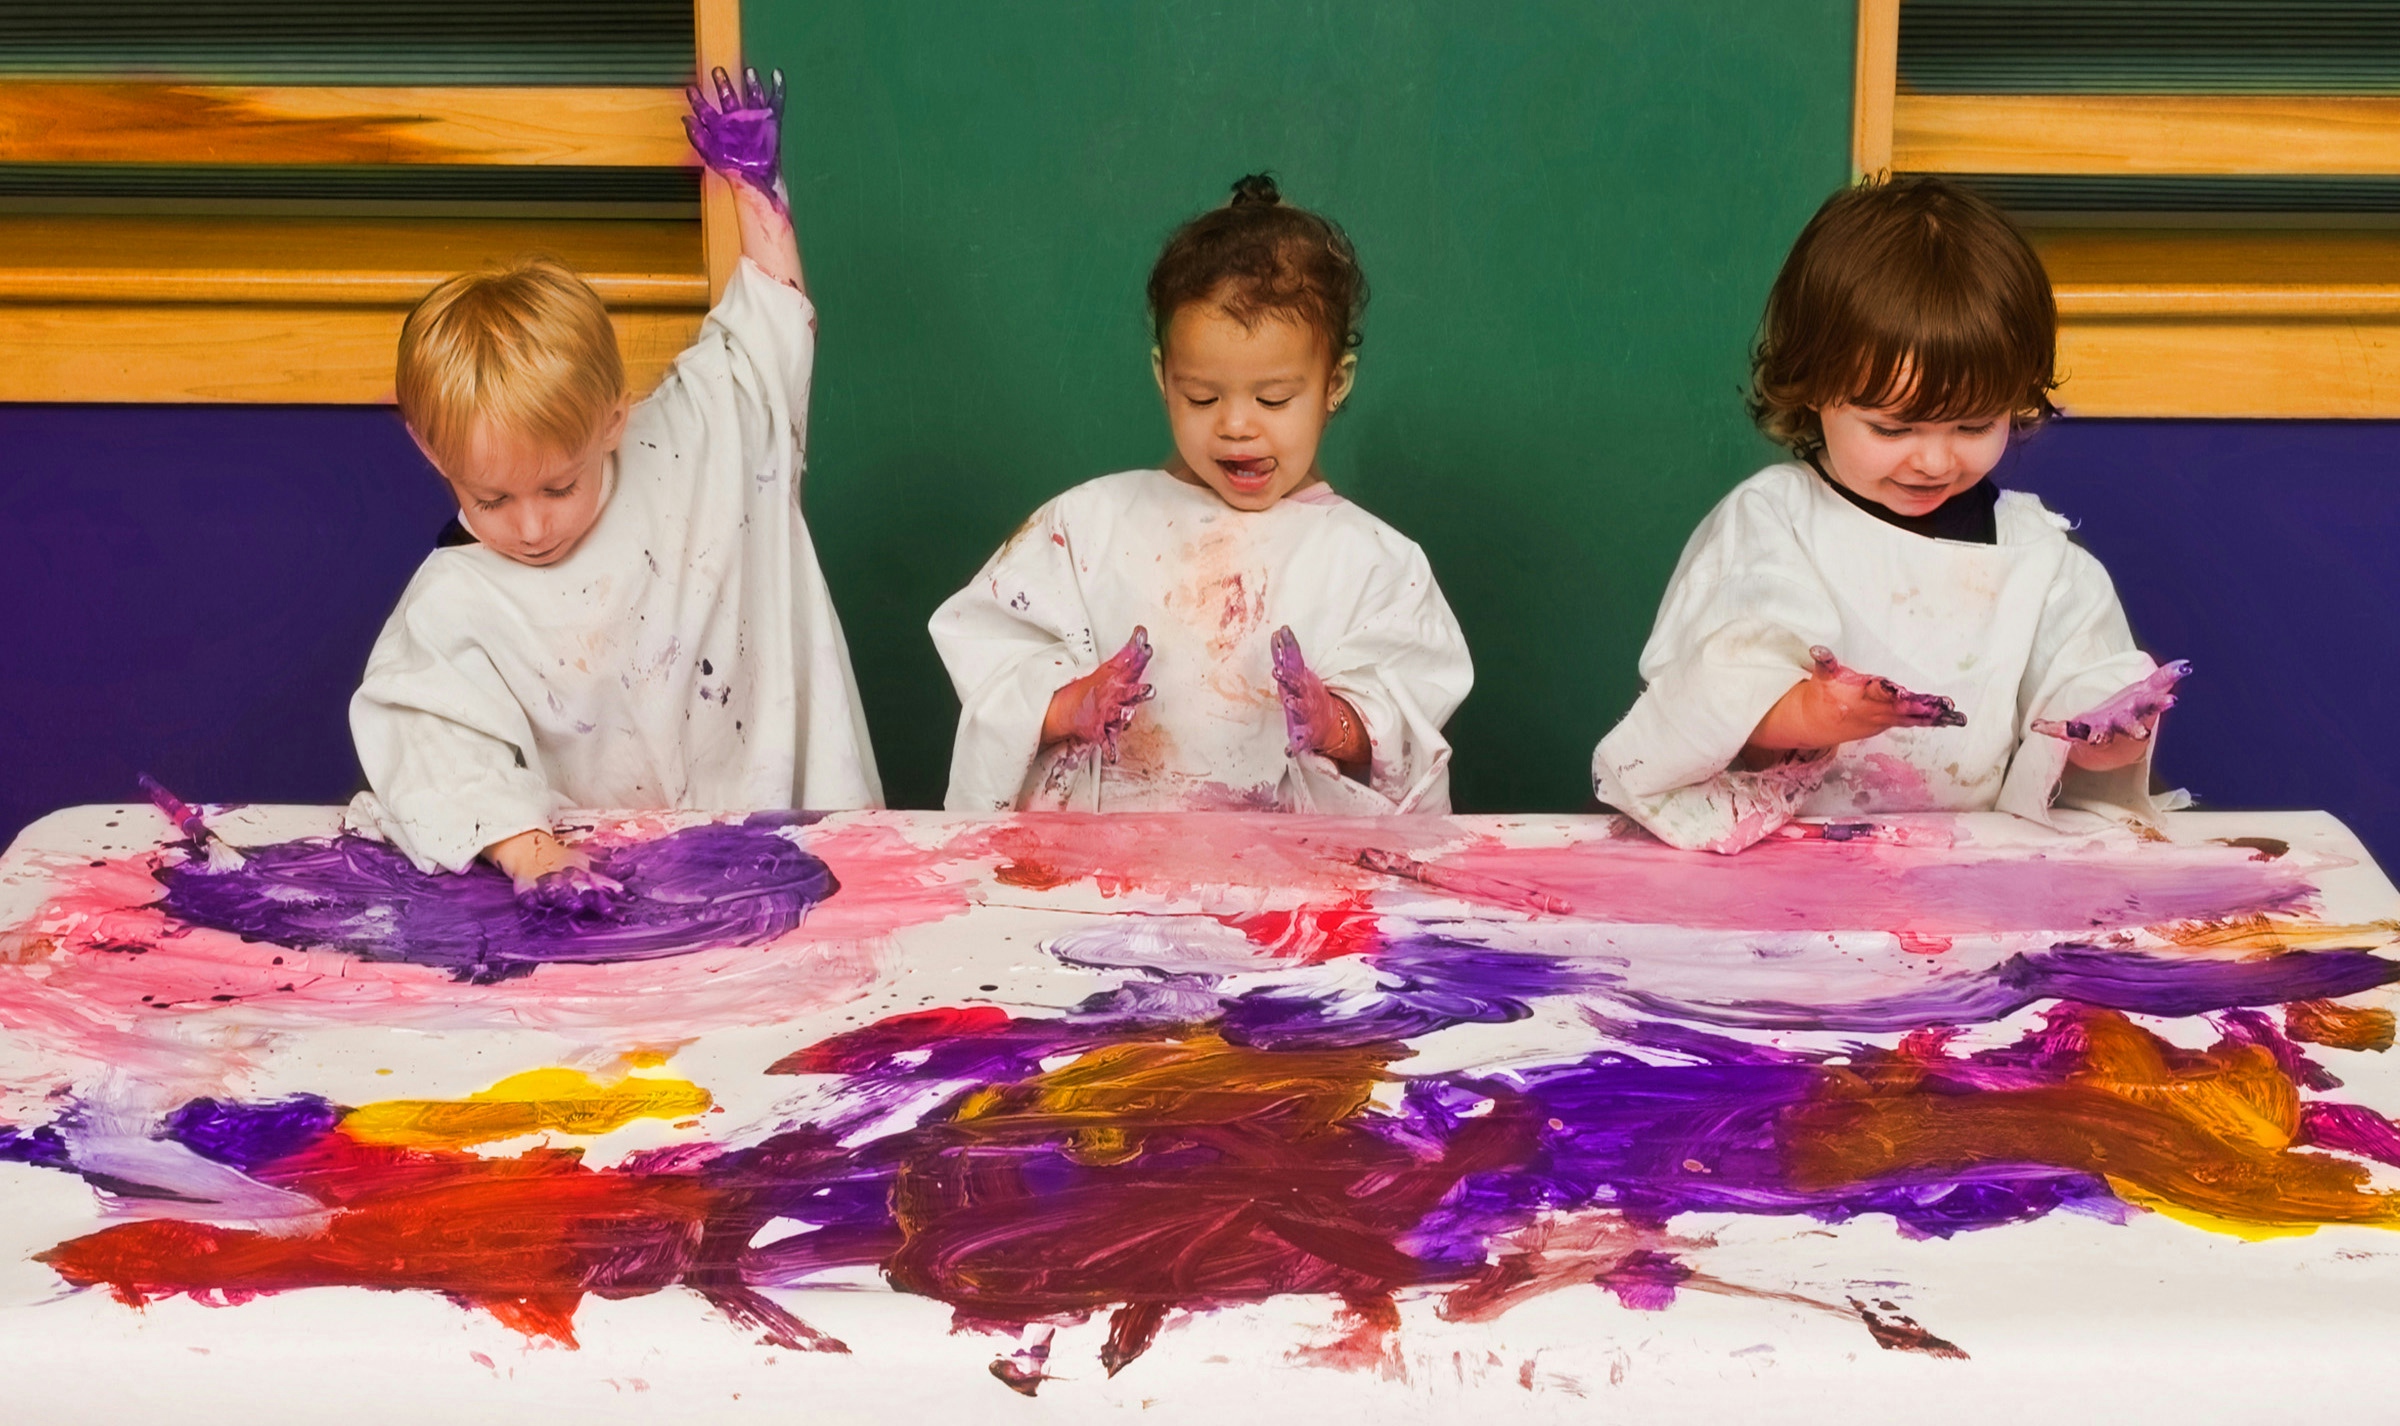 Toddlers in daycare fingerpaint with vibrant colors